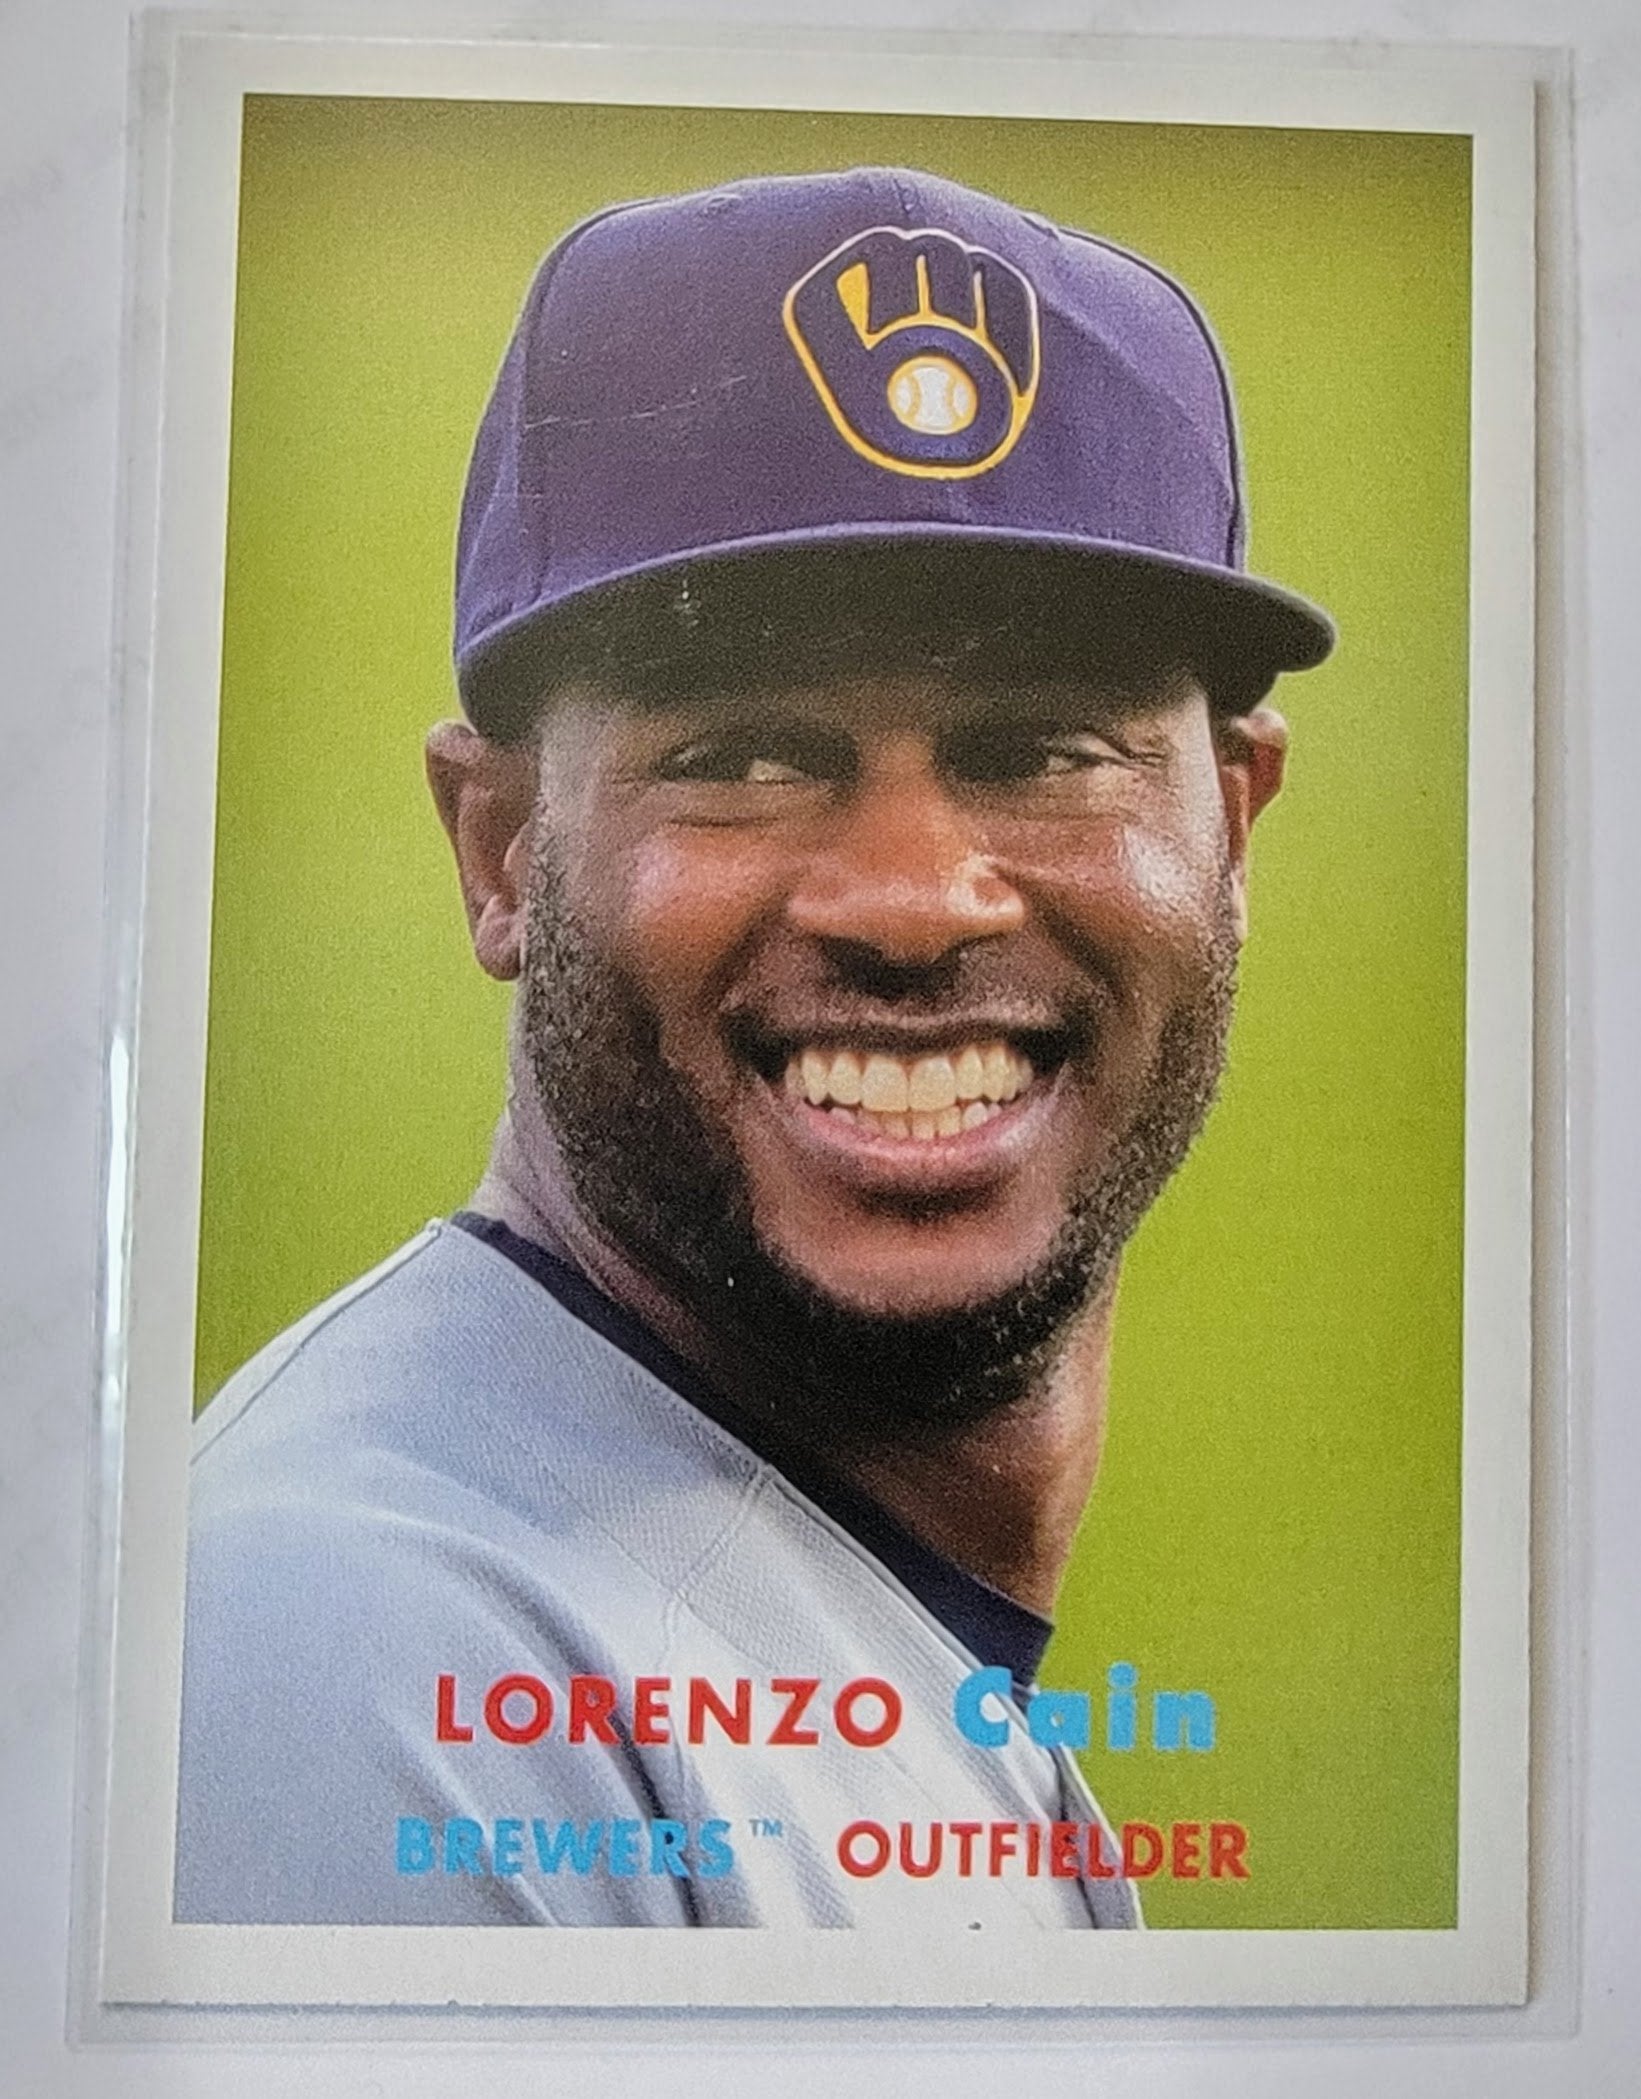 2021 Topps Archives Lorenzo Cain 1957 Baseball Trading Card SMCB1 simple Xclusive Collectibles   